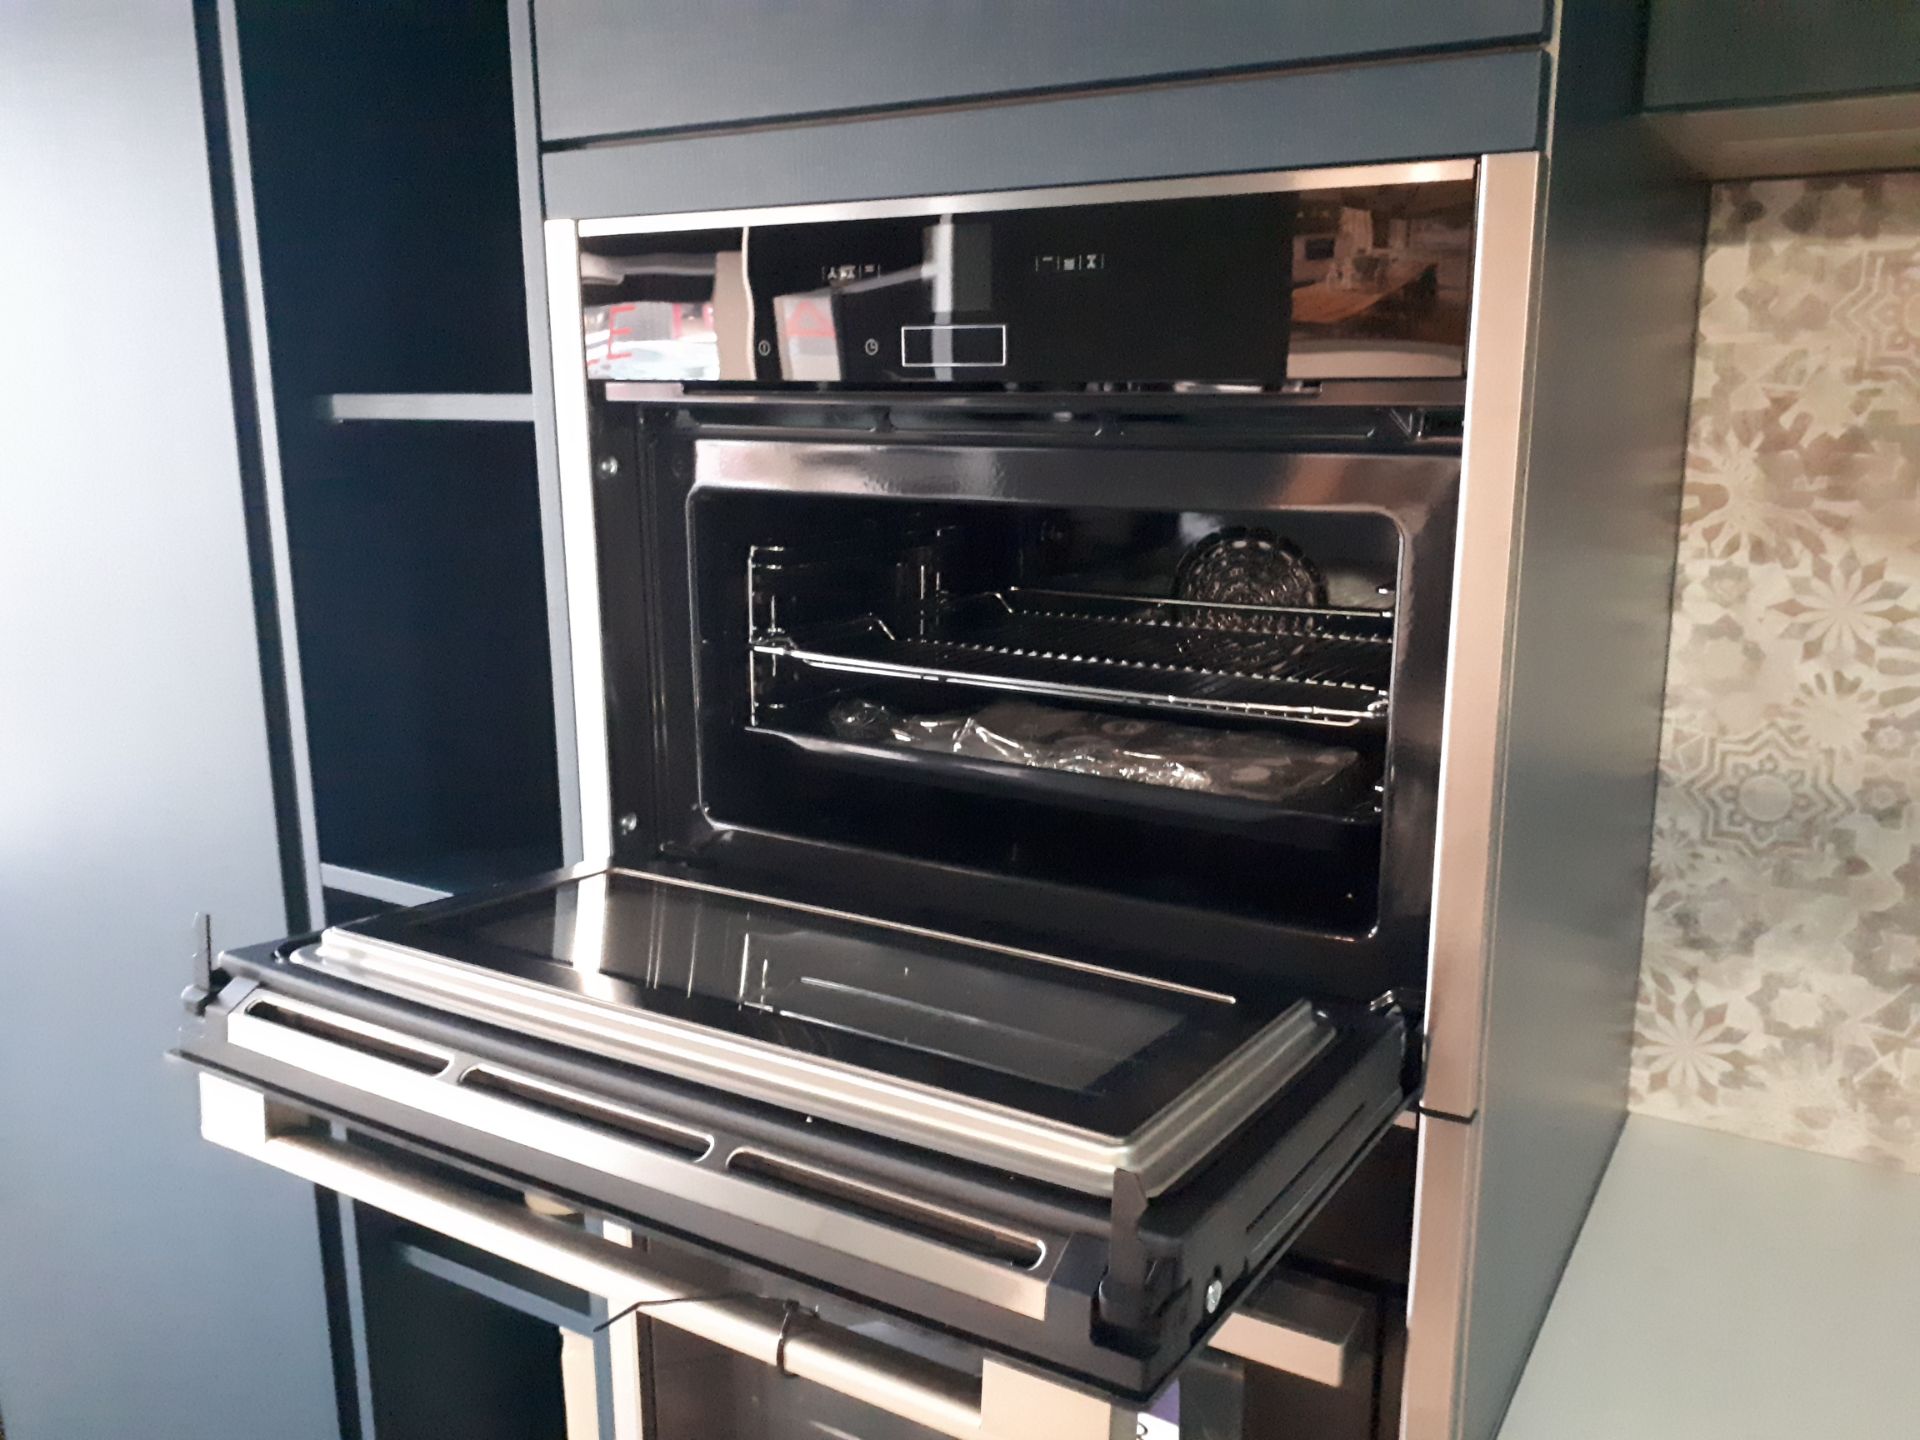 Neff C17MR02NOB Built In Compact Oven - Image 2 of 2